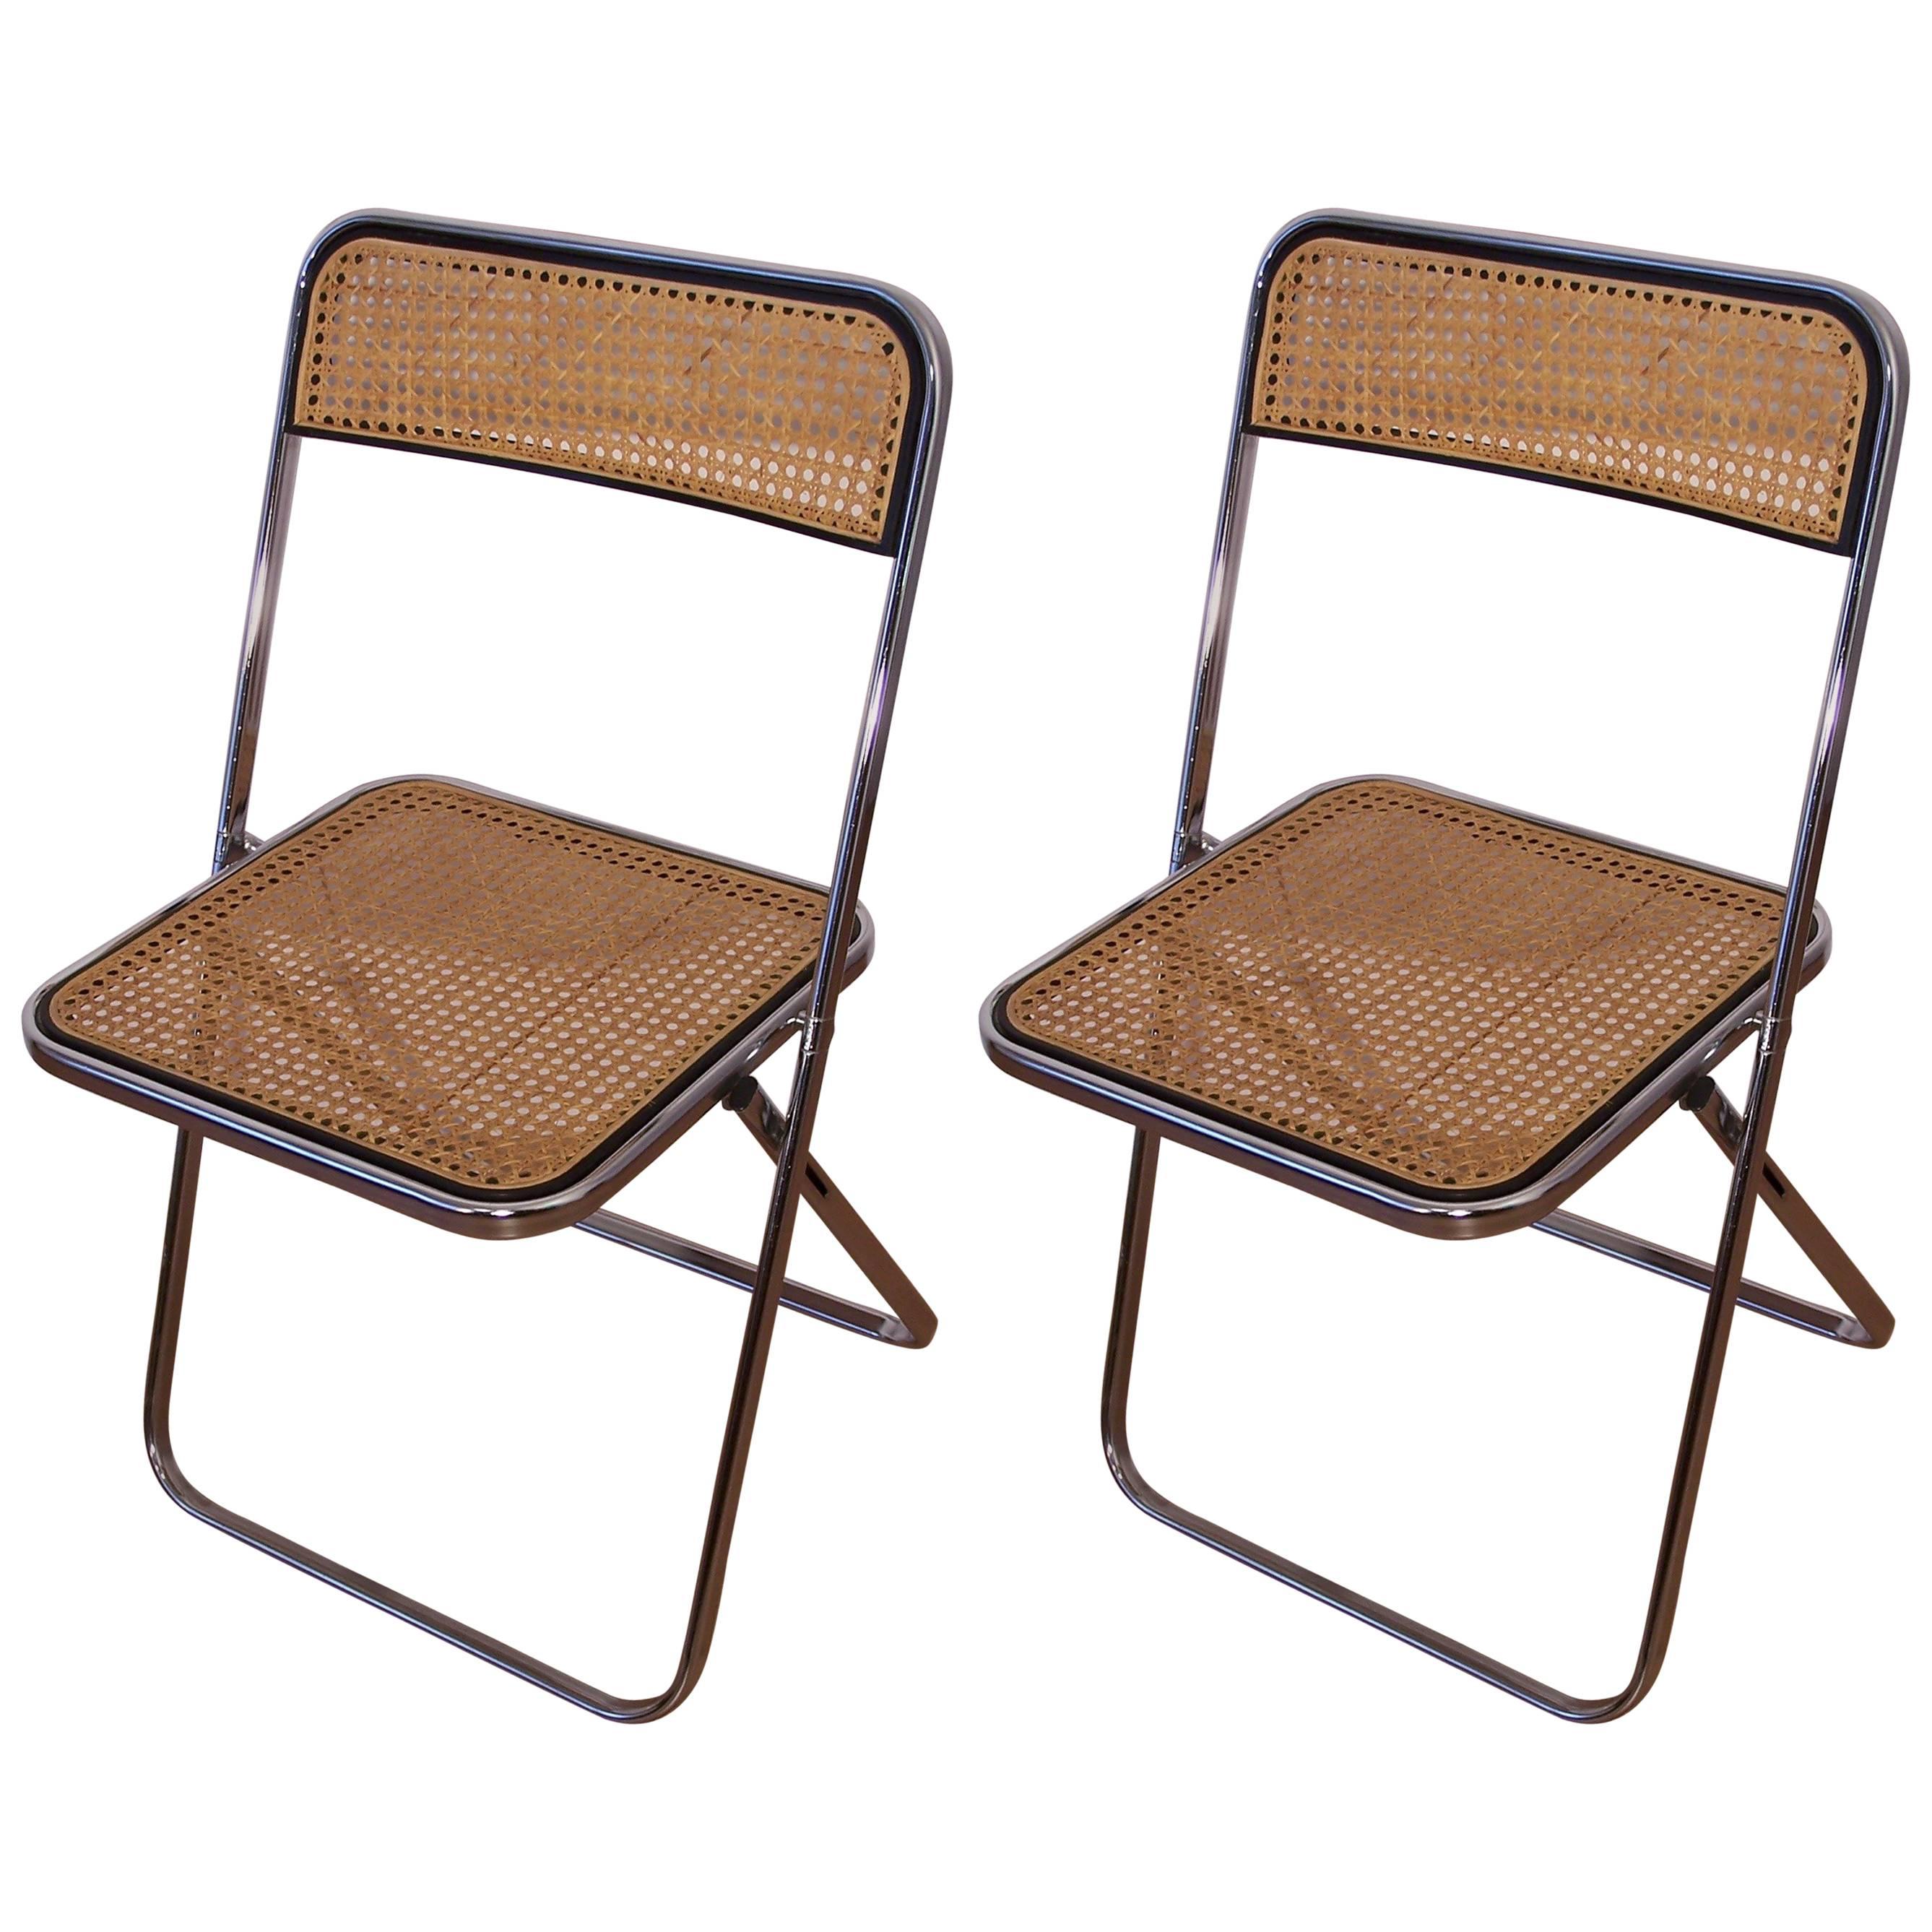 Castelli Style Chrome and Cane Pair of Folding Chairs